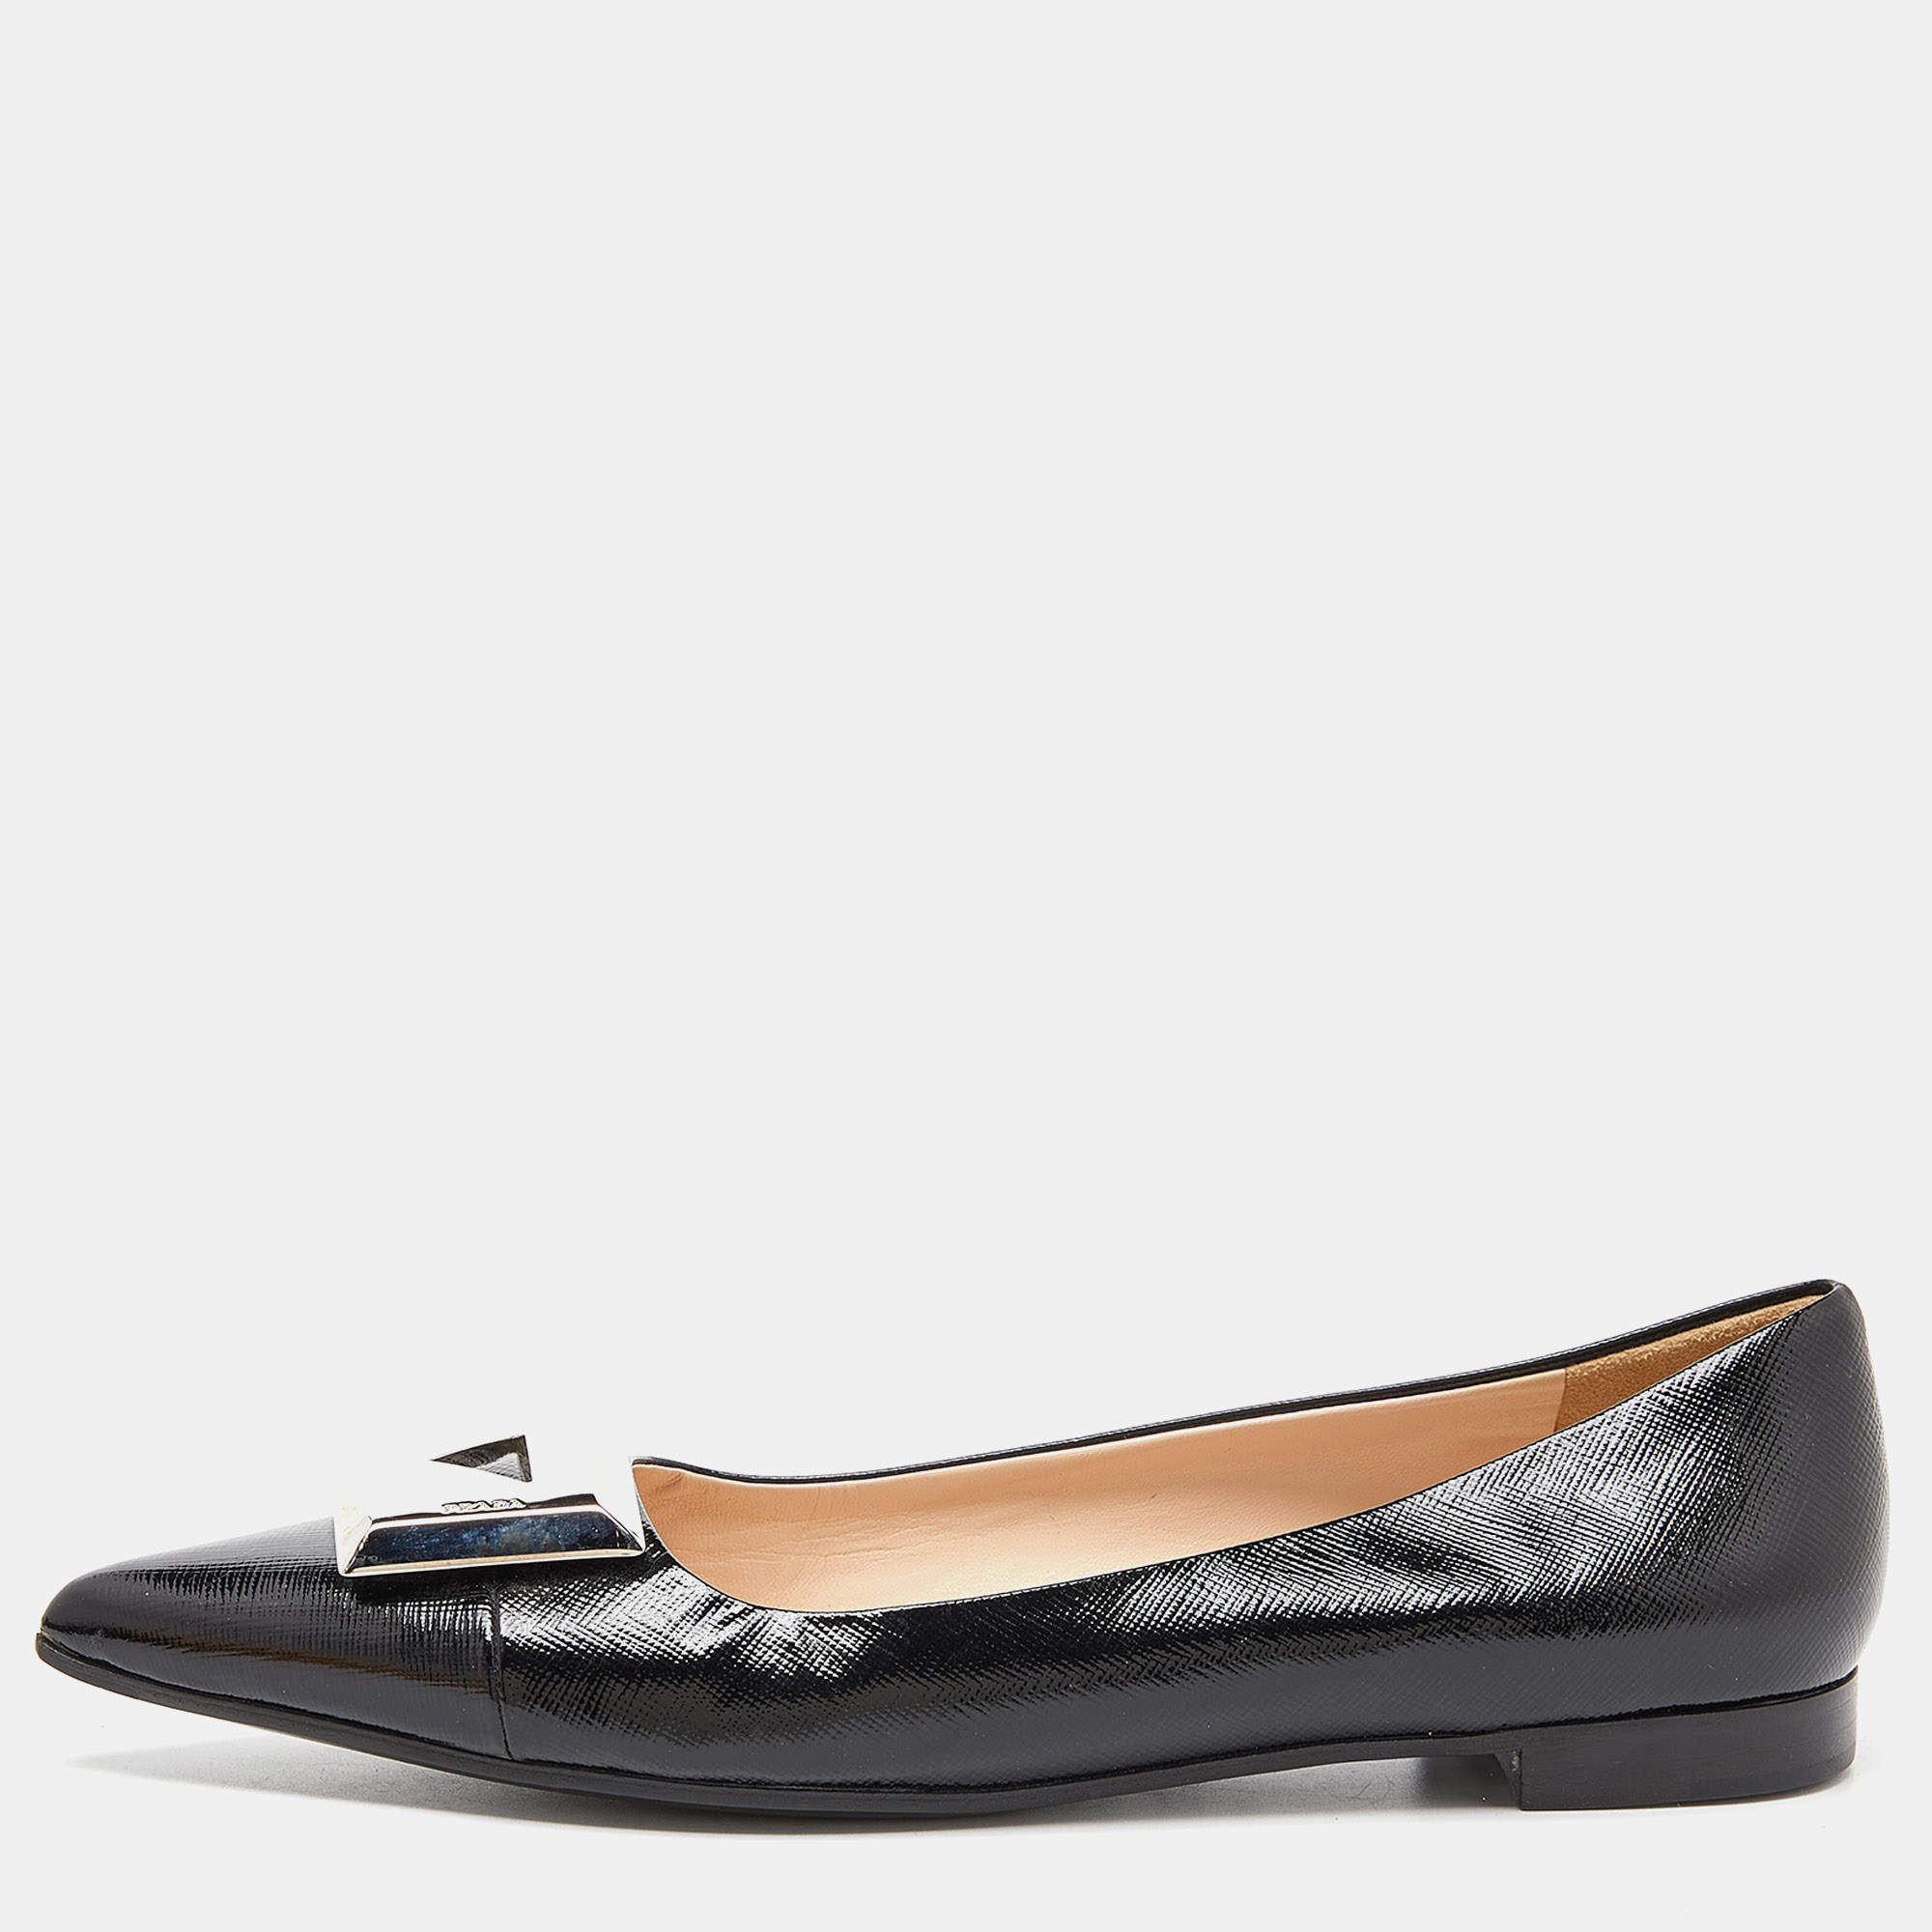 Prada Black Patent Leather Pointed Toe Ballet Flats Size 38.5